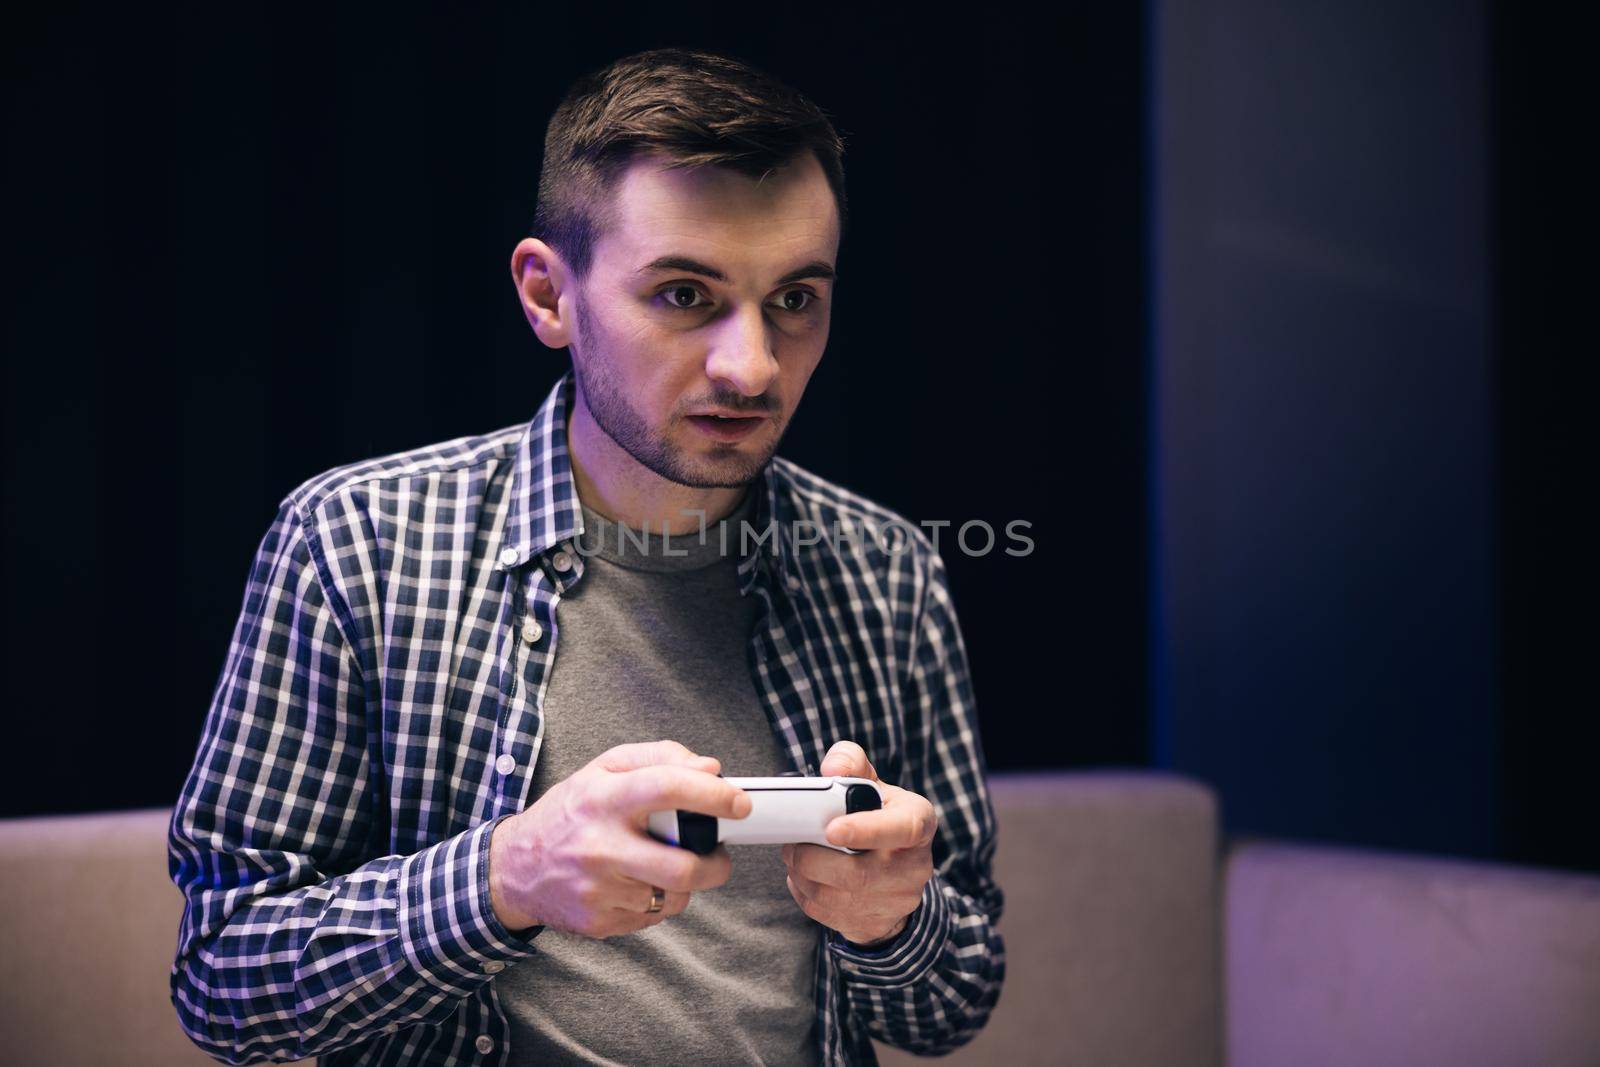 Caucasian guy playing video game and using joystick . Handsome young man enjoying free time alone while sitting on couch in living room.